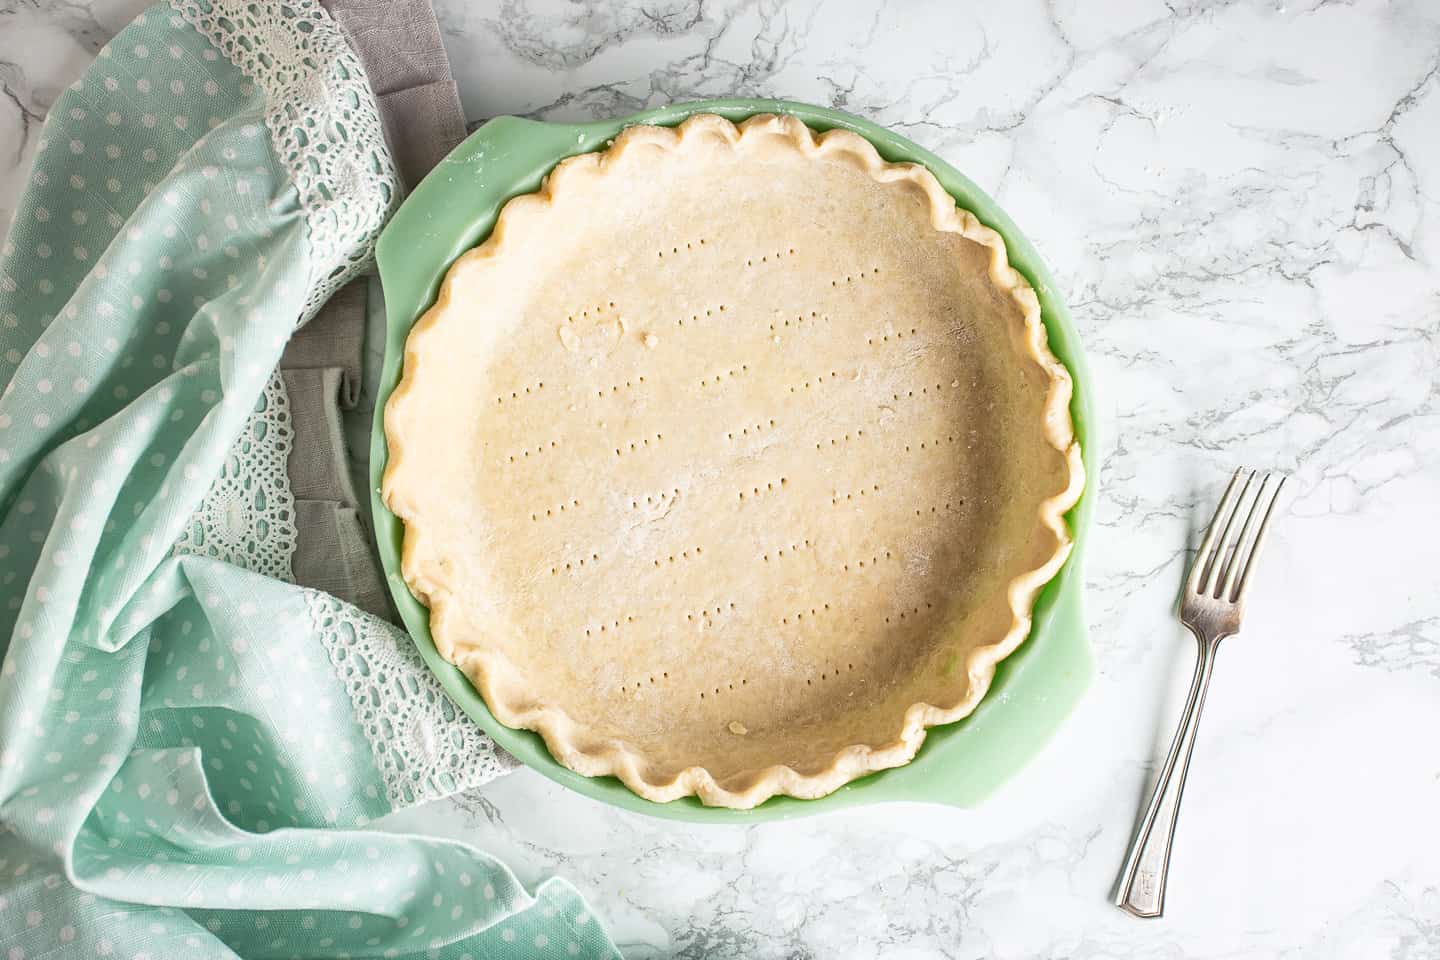 A docked, unbaked pie crust in a green pie dish.